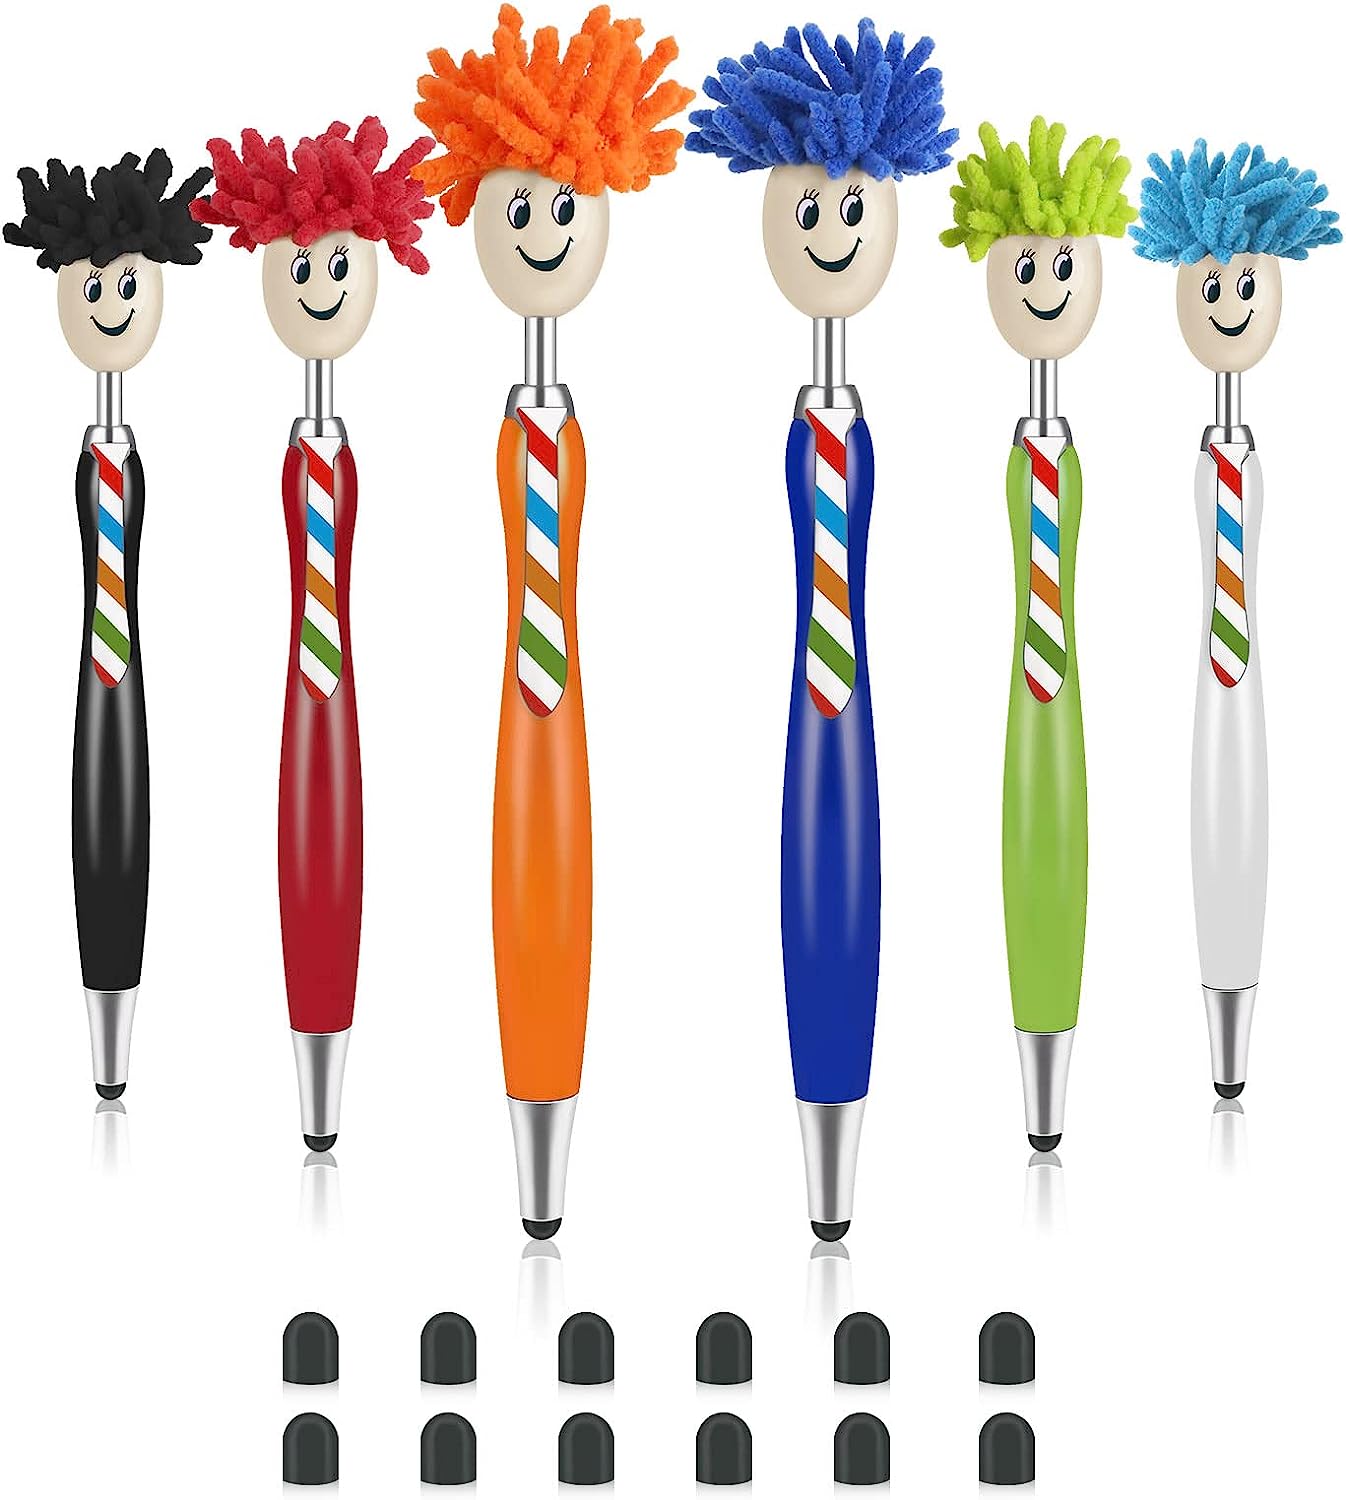 Stylus Pens for Touch Screens, StylusHome 6 Pieces [...]